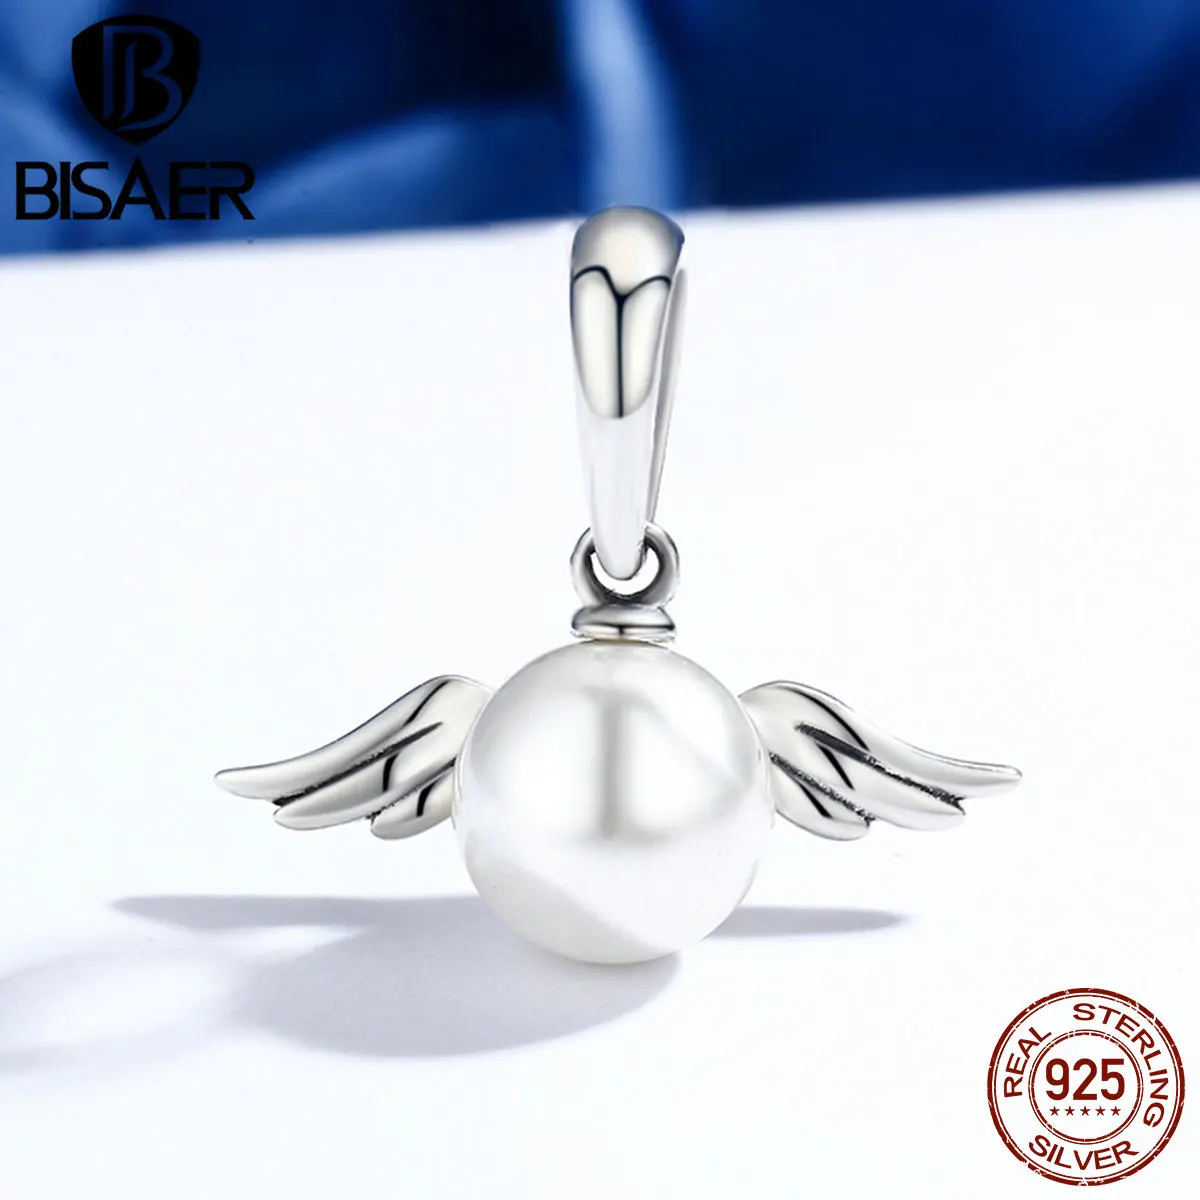 Bisaer Authentic 925 Silver CZ Angel Accessories Charms Beads Jewelry For Women